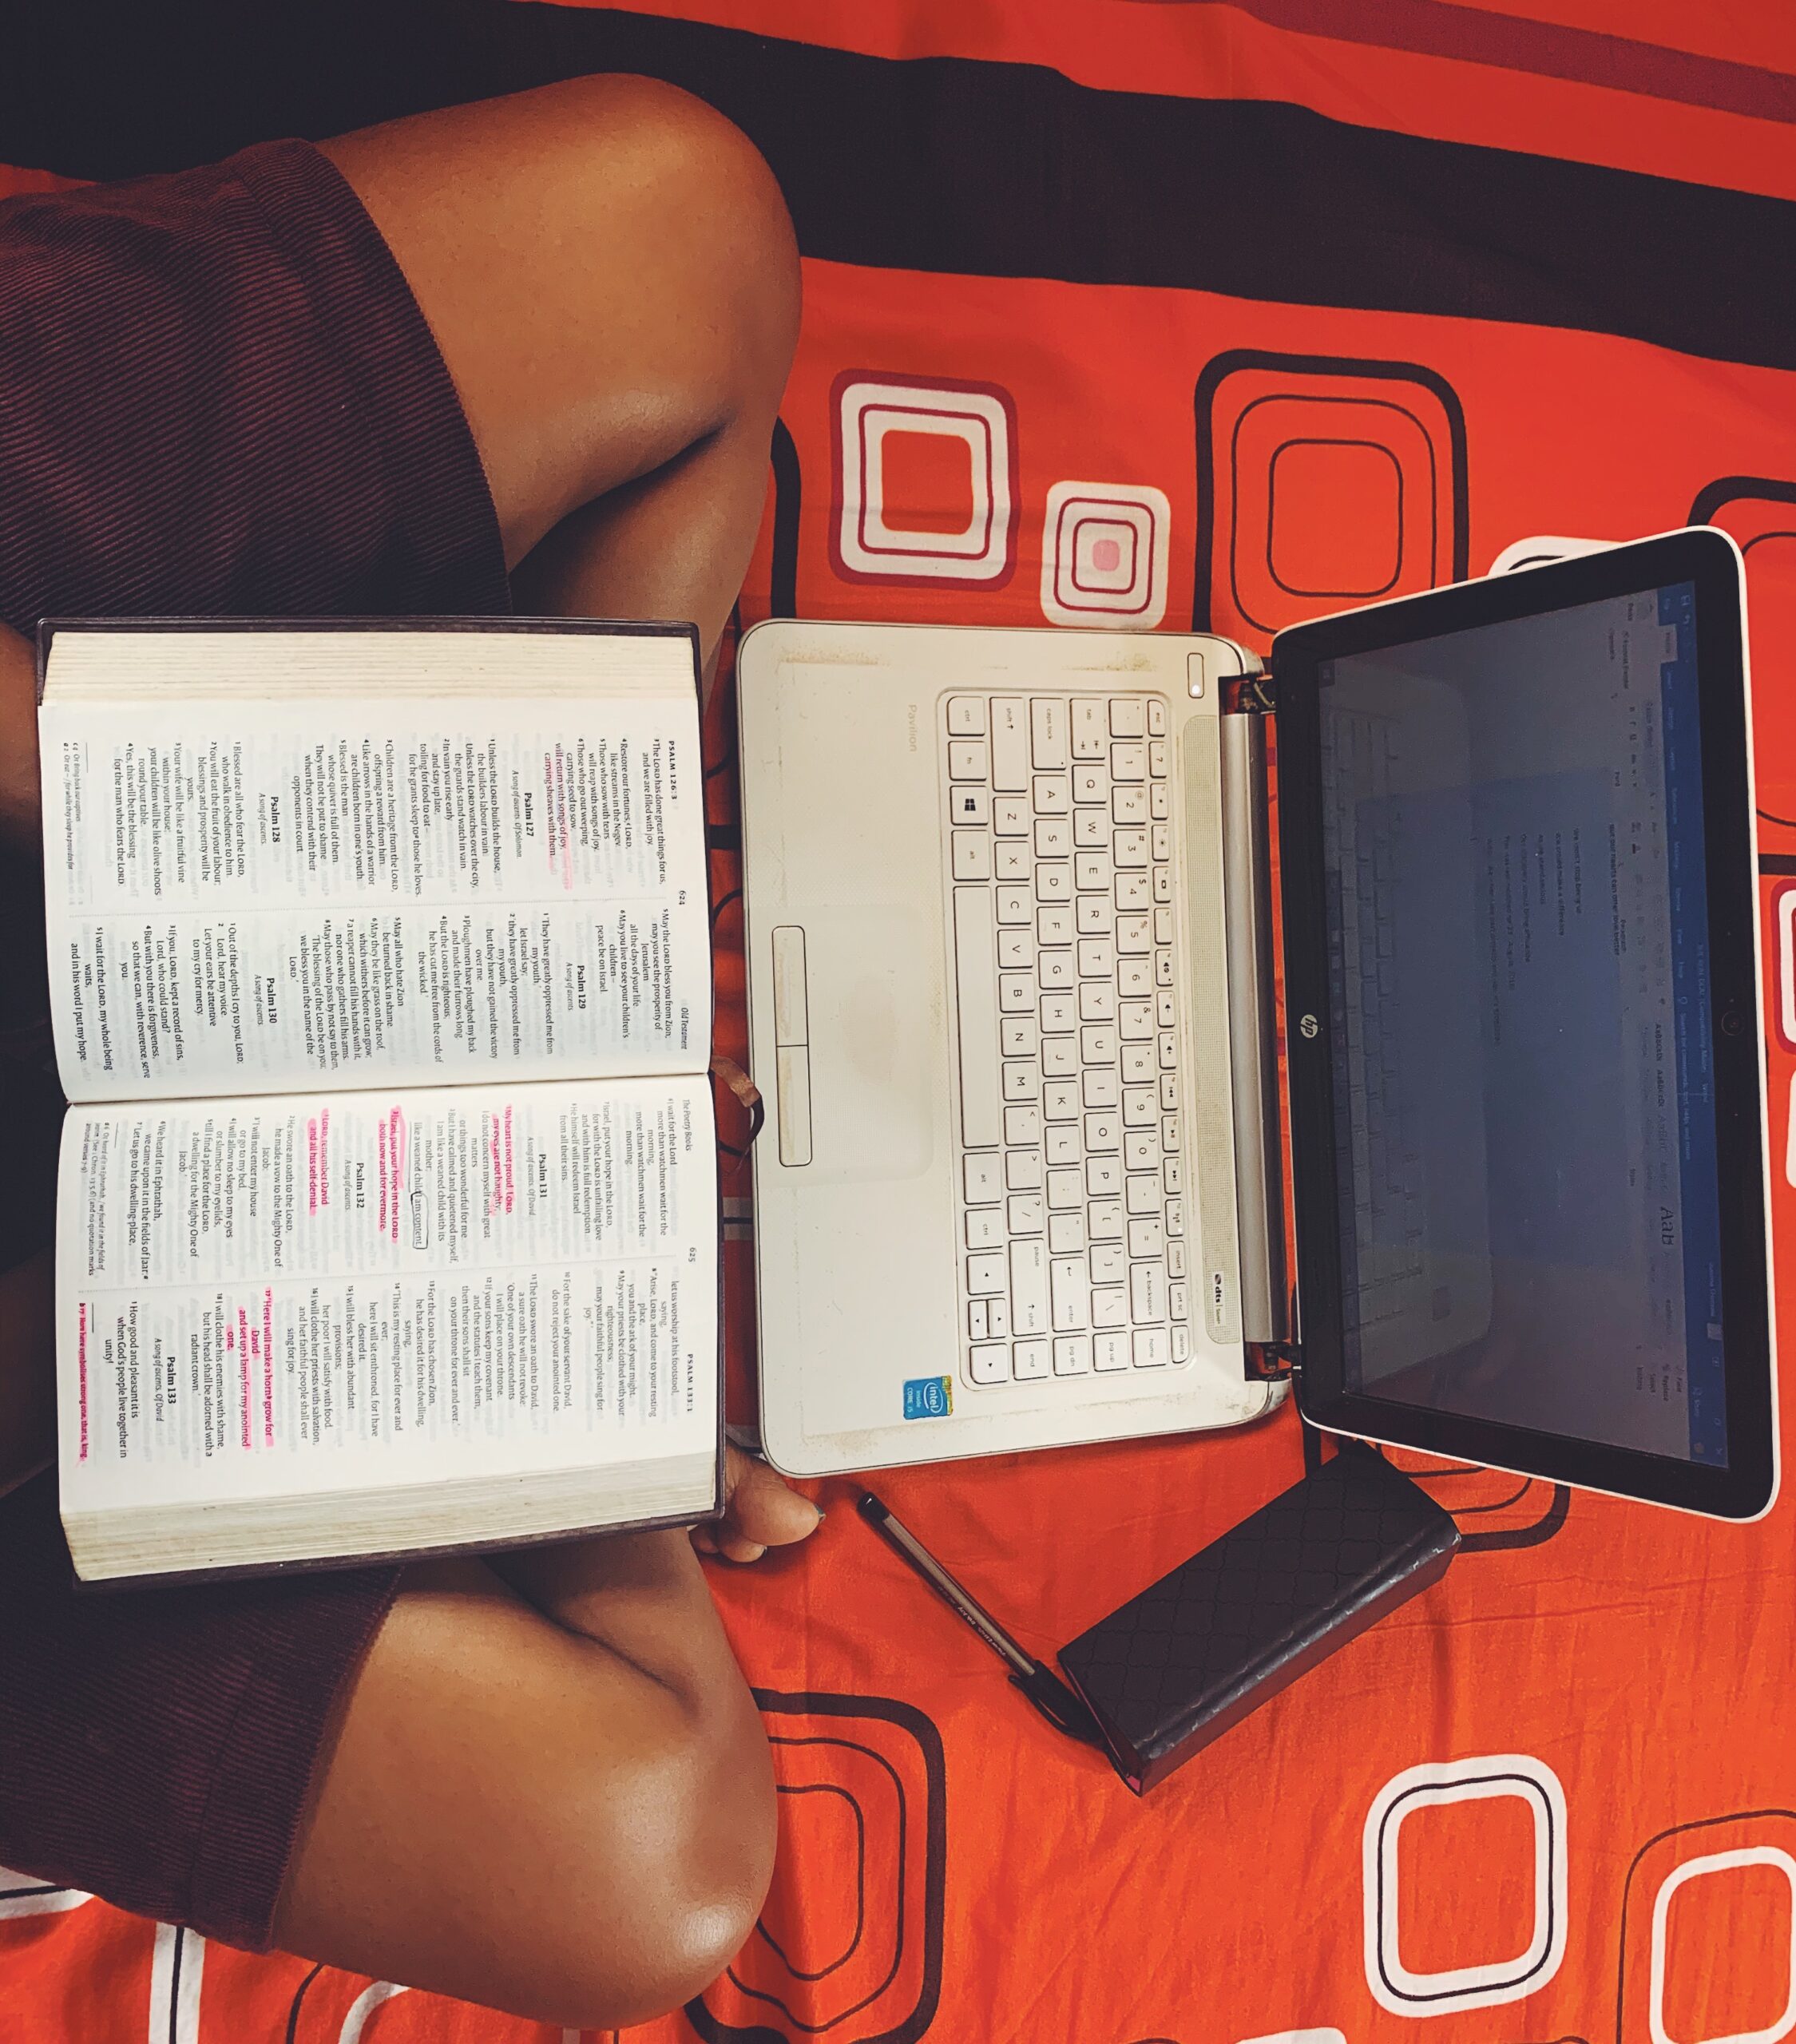 Iruoma with her bible and laptop showing the free bible study tools